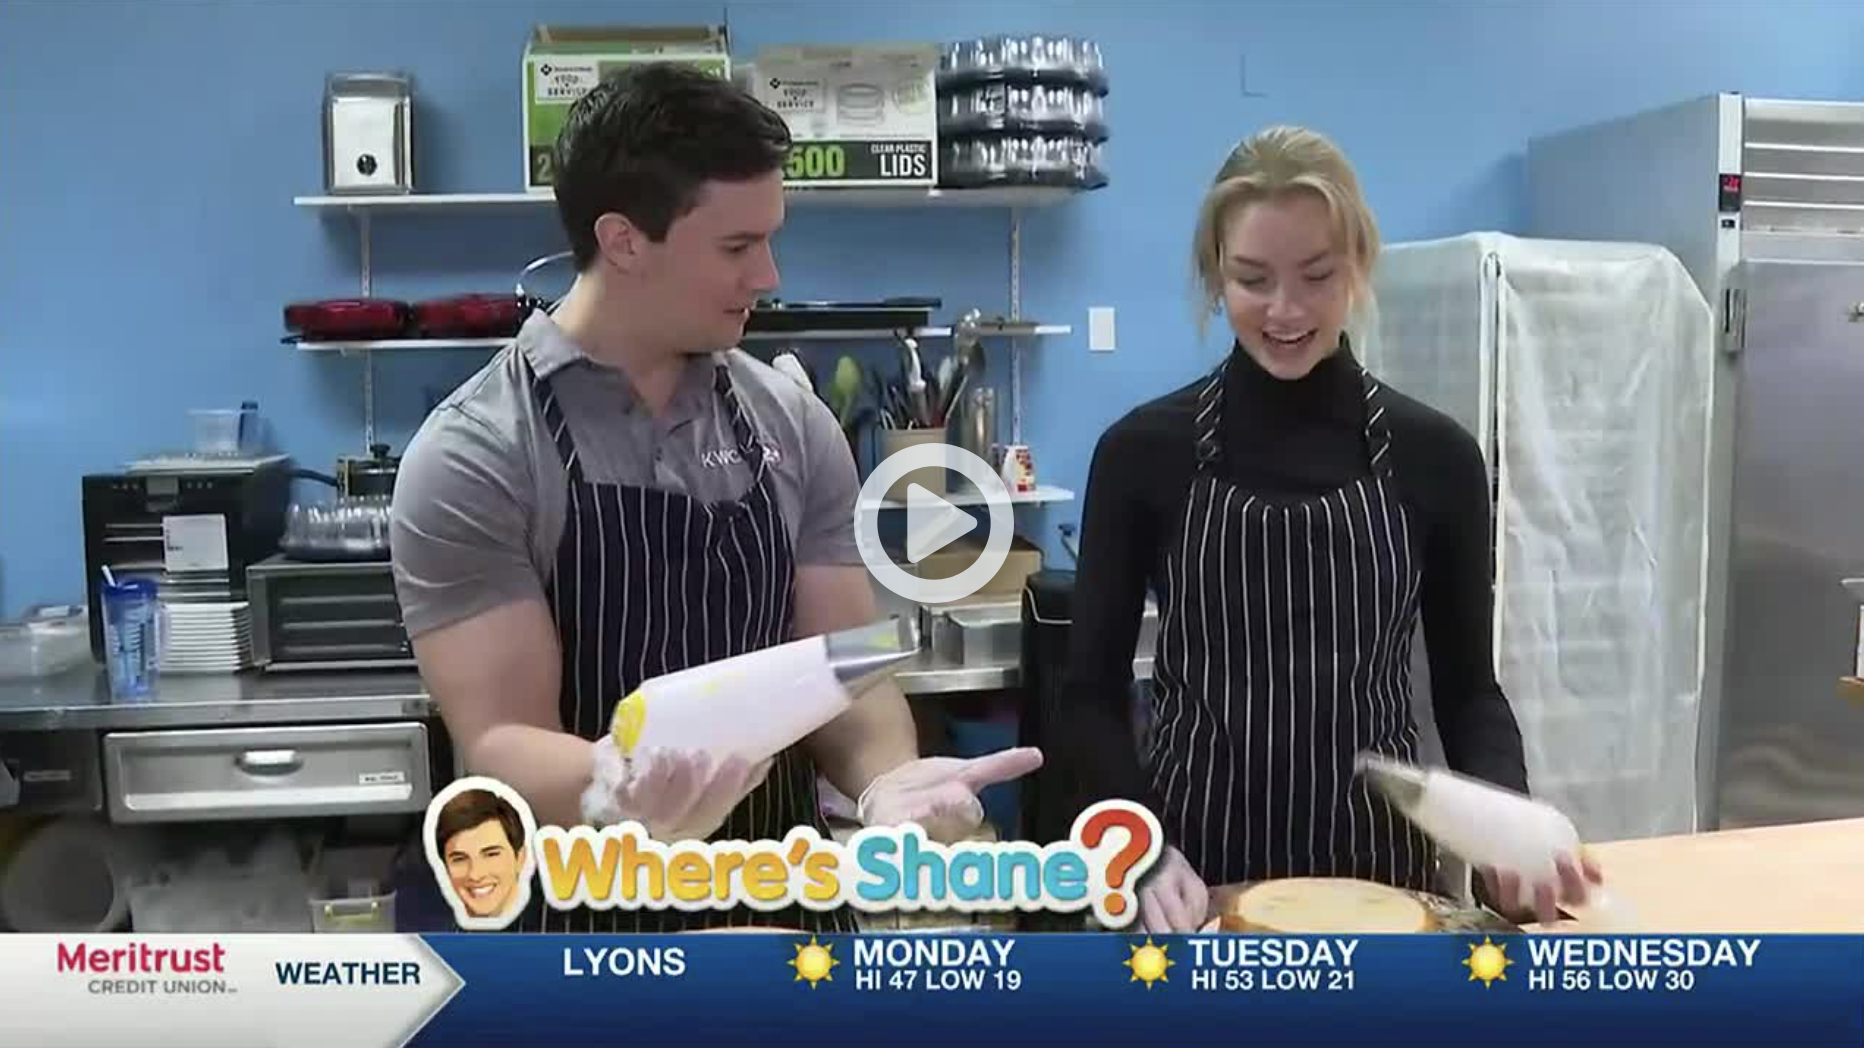 A screenshot of a news broadcast interview with Shane from KWCH and Lauren from River City Sweet Shop, holding icing bags